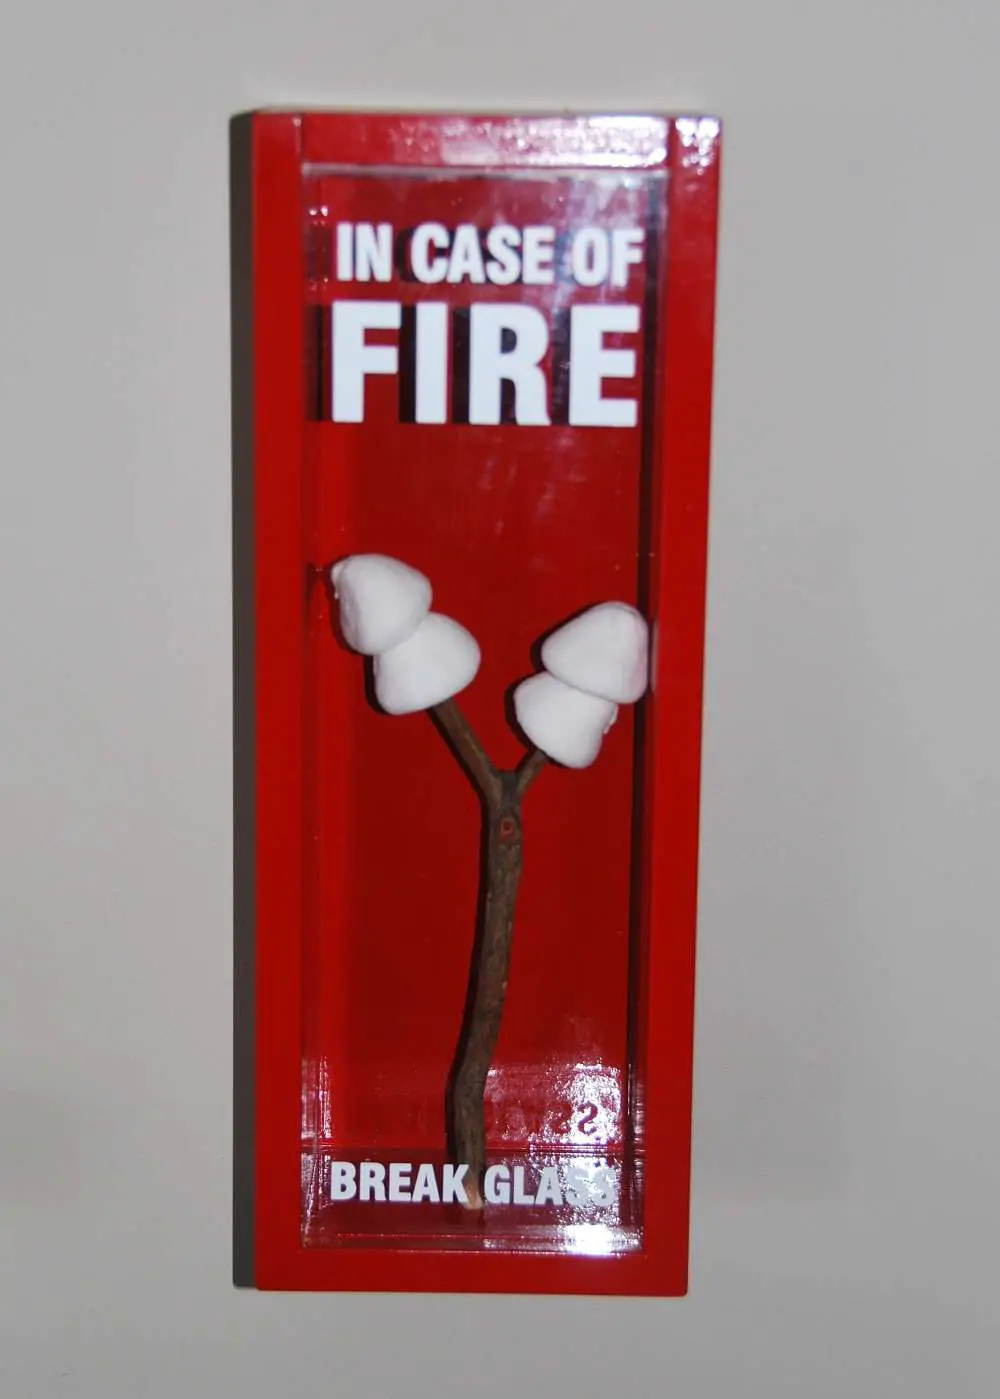 In Case Of Fire | Australia Travel Blog | In Case Of Fire - Break Glass Here For... | Australia Travel Blog | Author: Anthony Bianco - The Travel Tart Blog